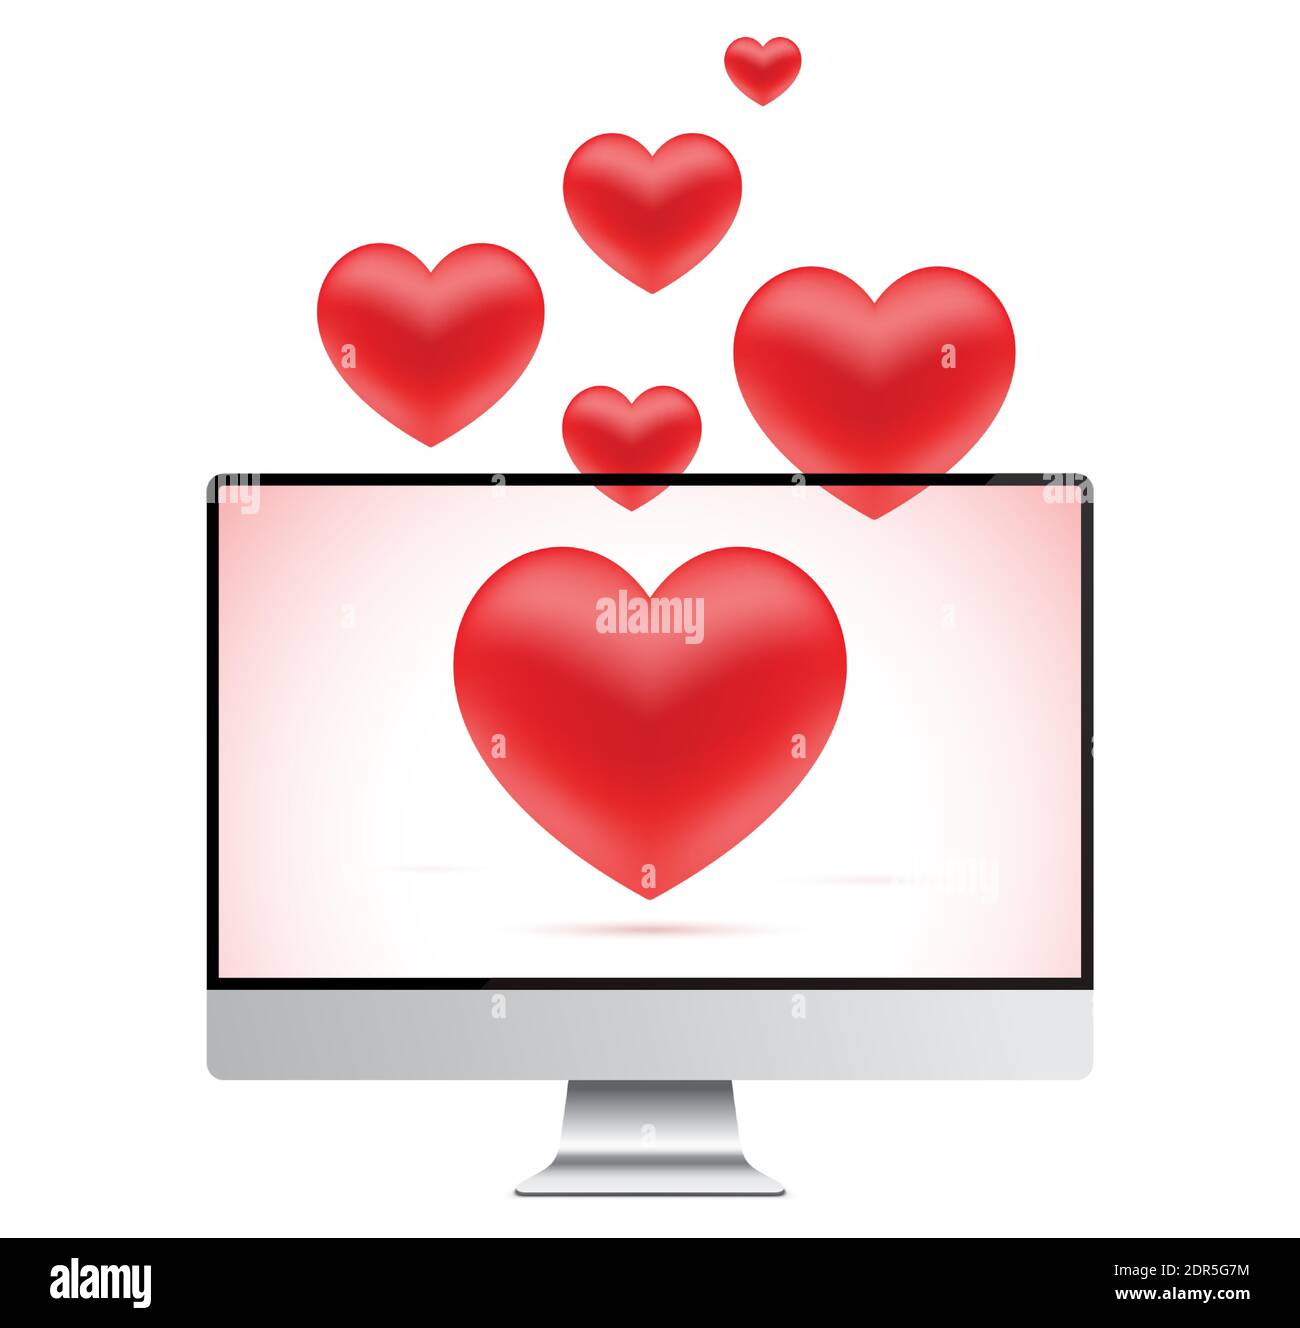 Romantic message concept, with red hearts flying out from a personal computer screen. Vector illustration for Valentines day, or love relationships design decoration. Stock Vector